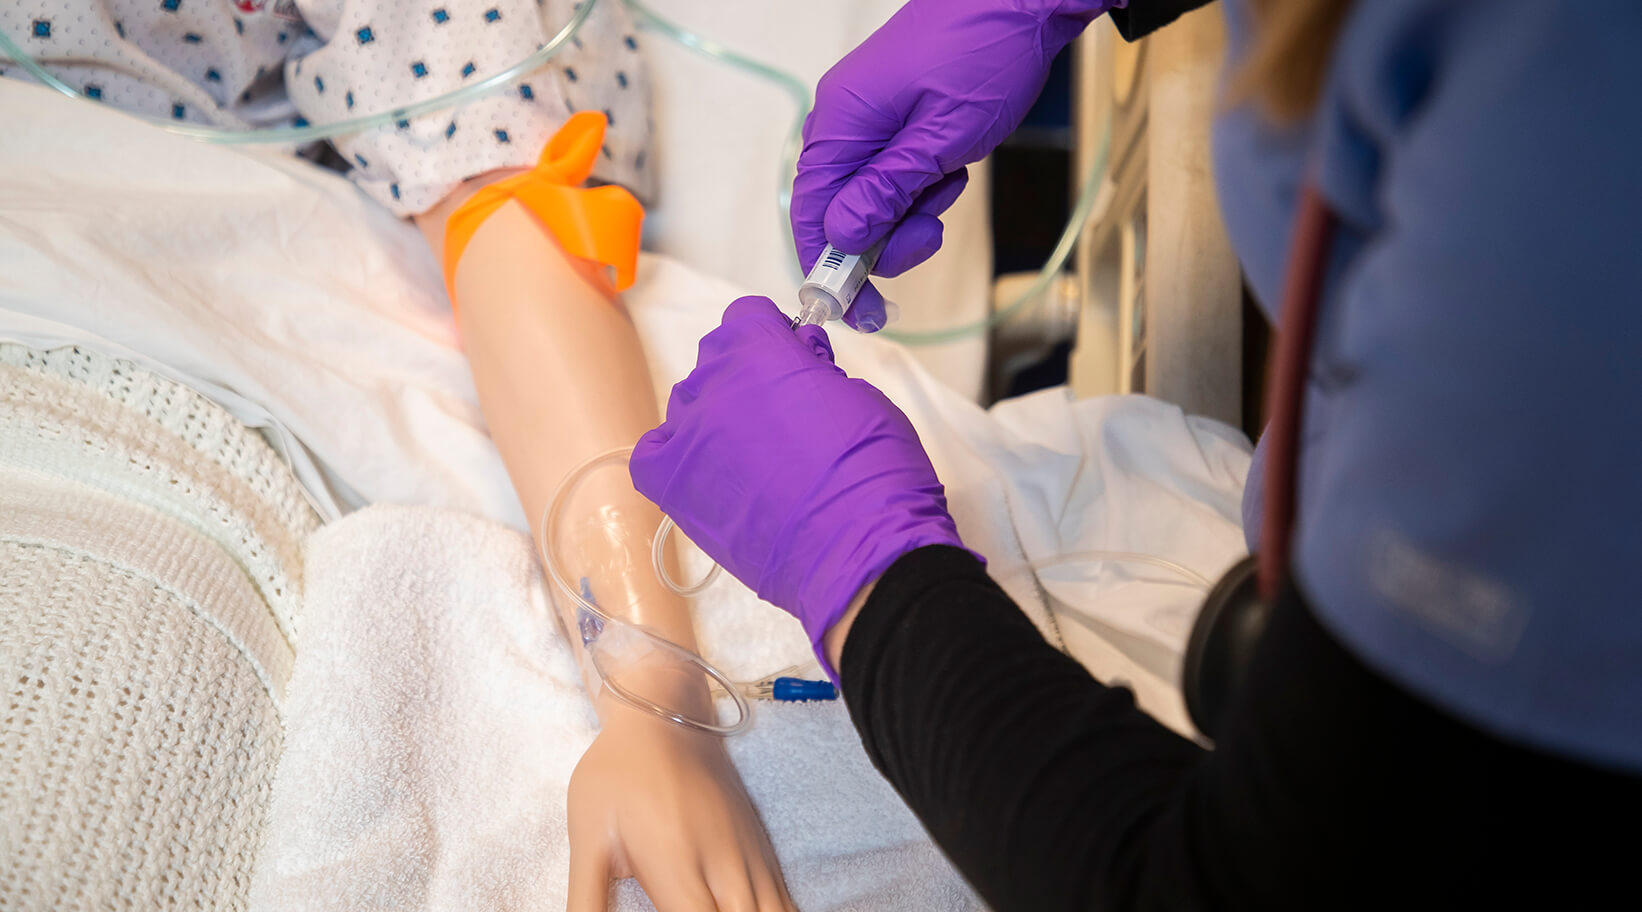 Students practicing using syringes on a simulated patient